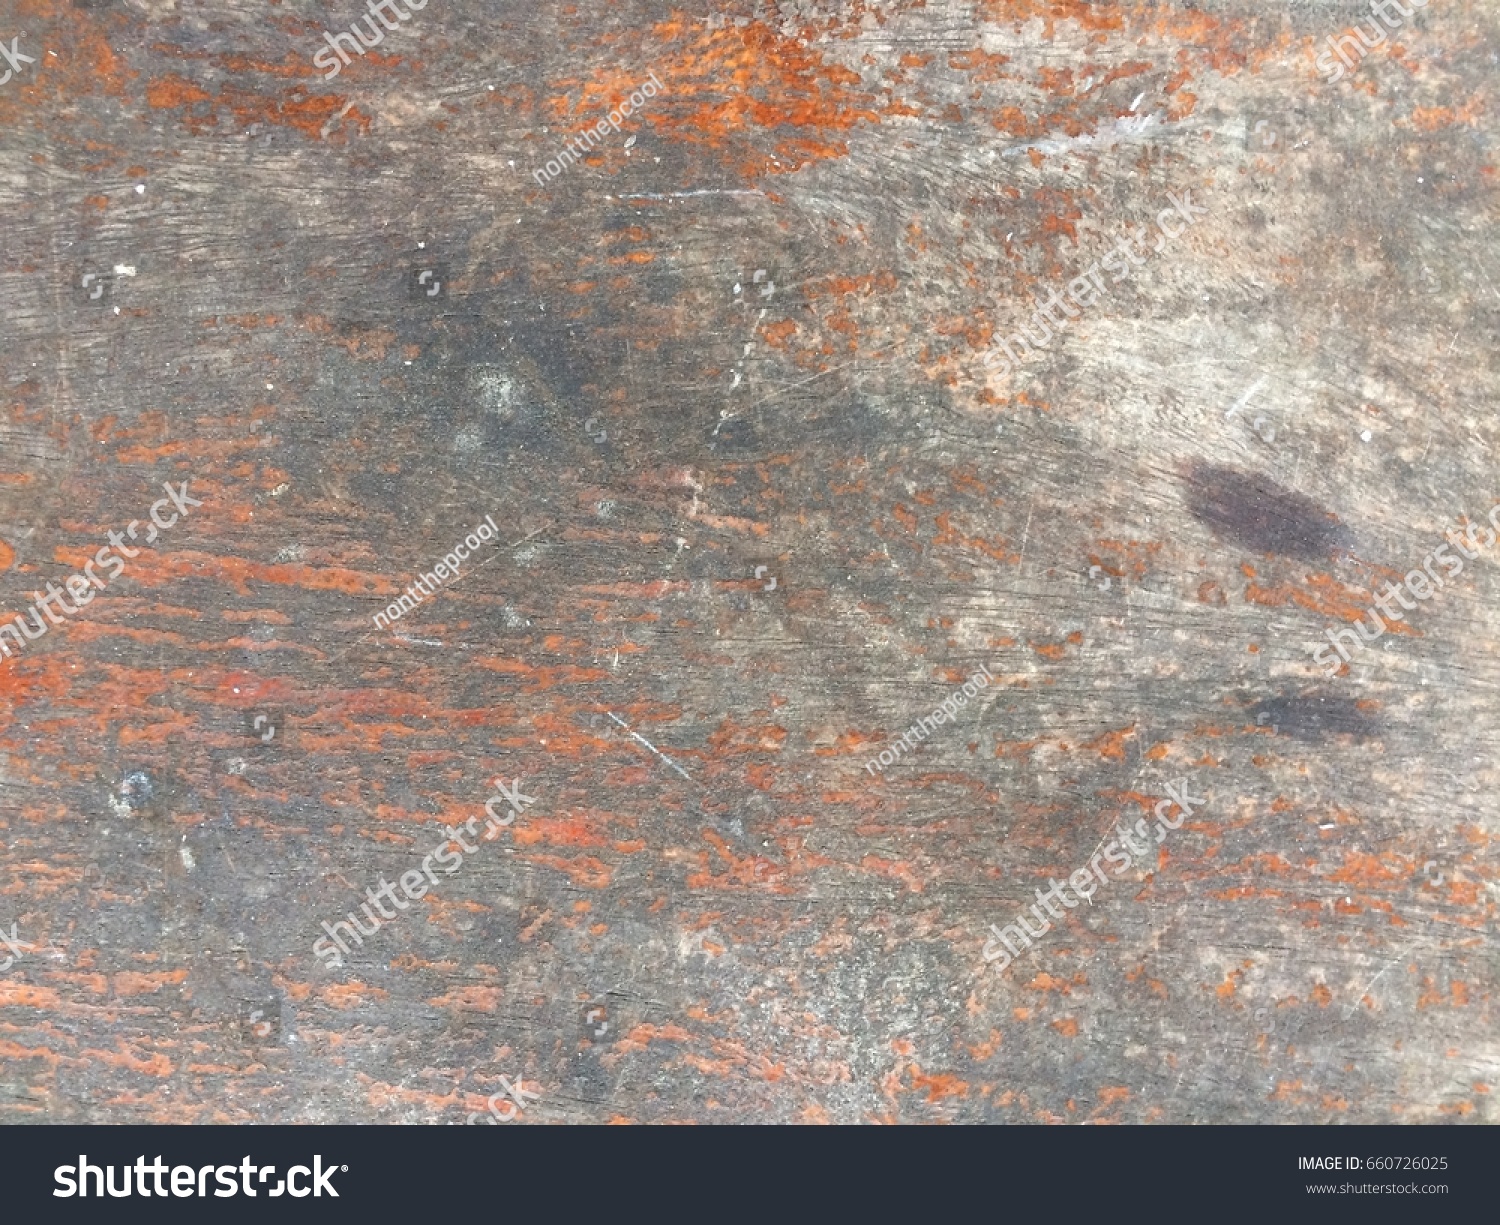 Old scratch wood texture #660726025